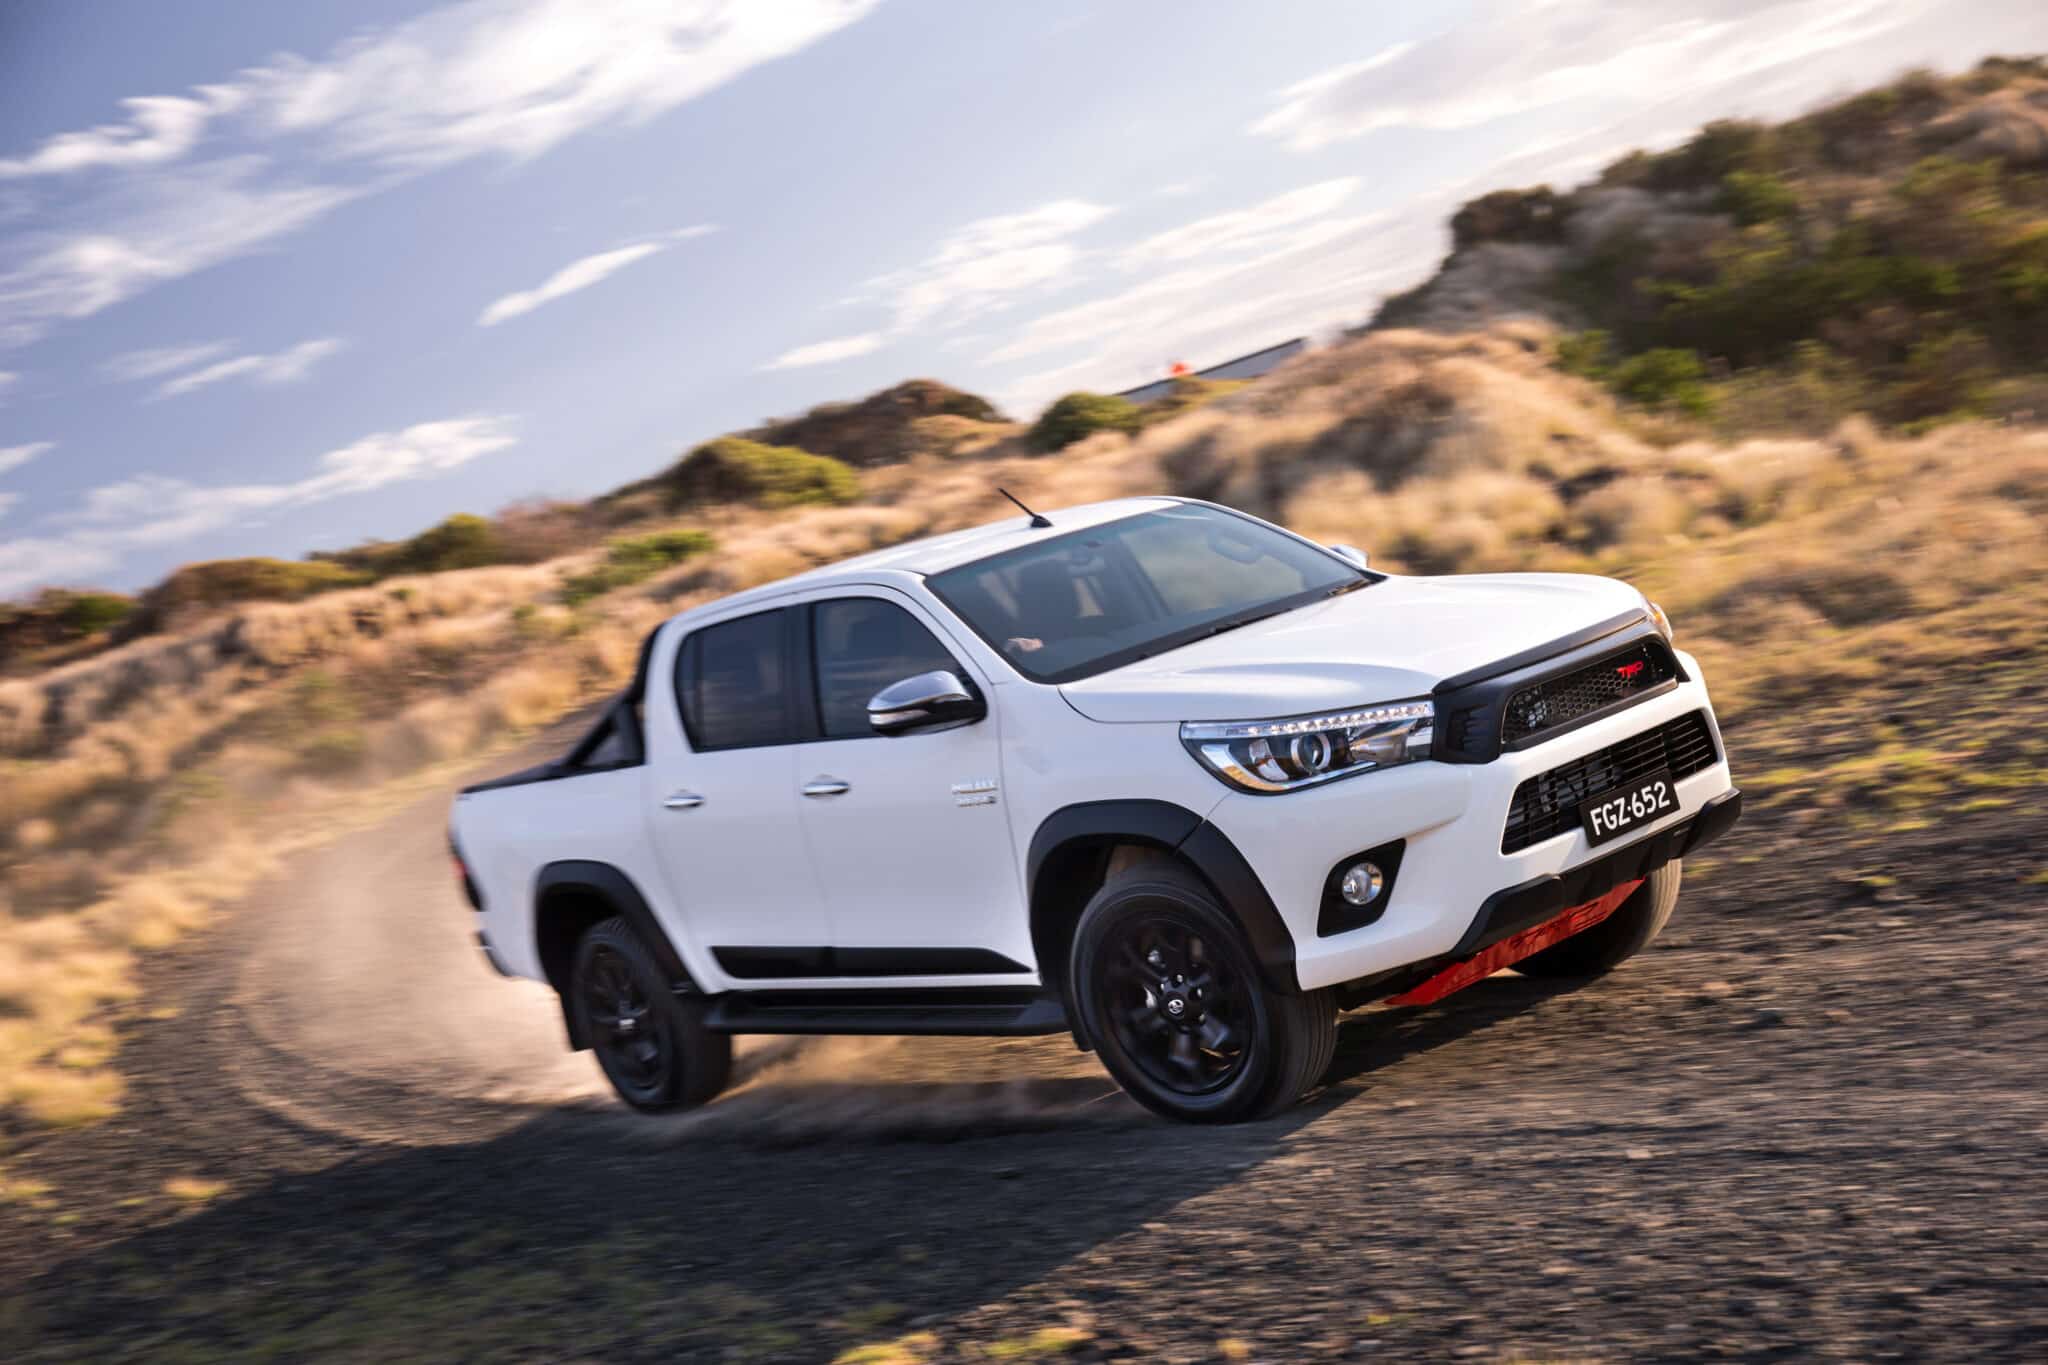 2017 Toyota HiLux with TRD accessories